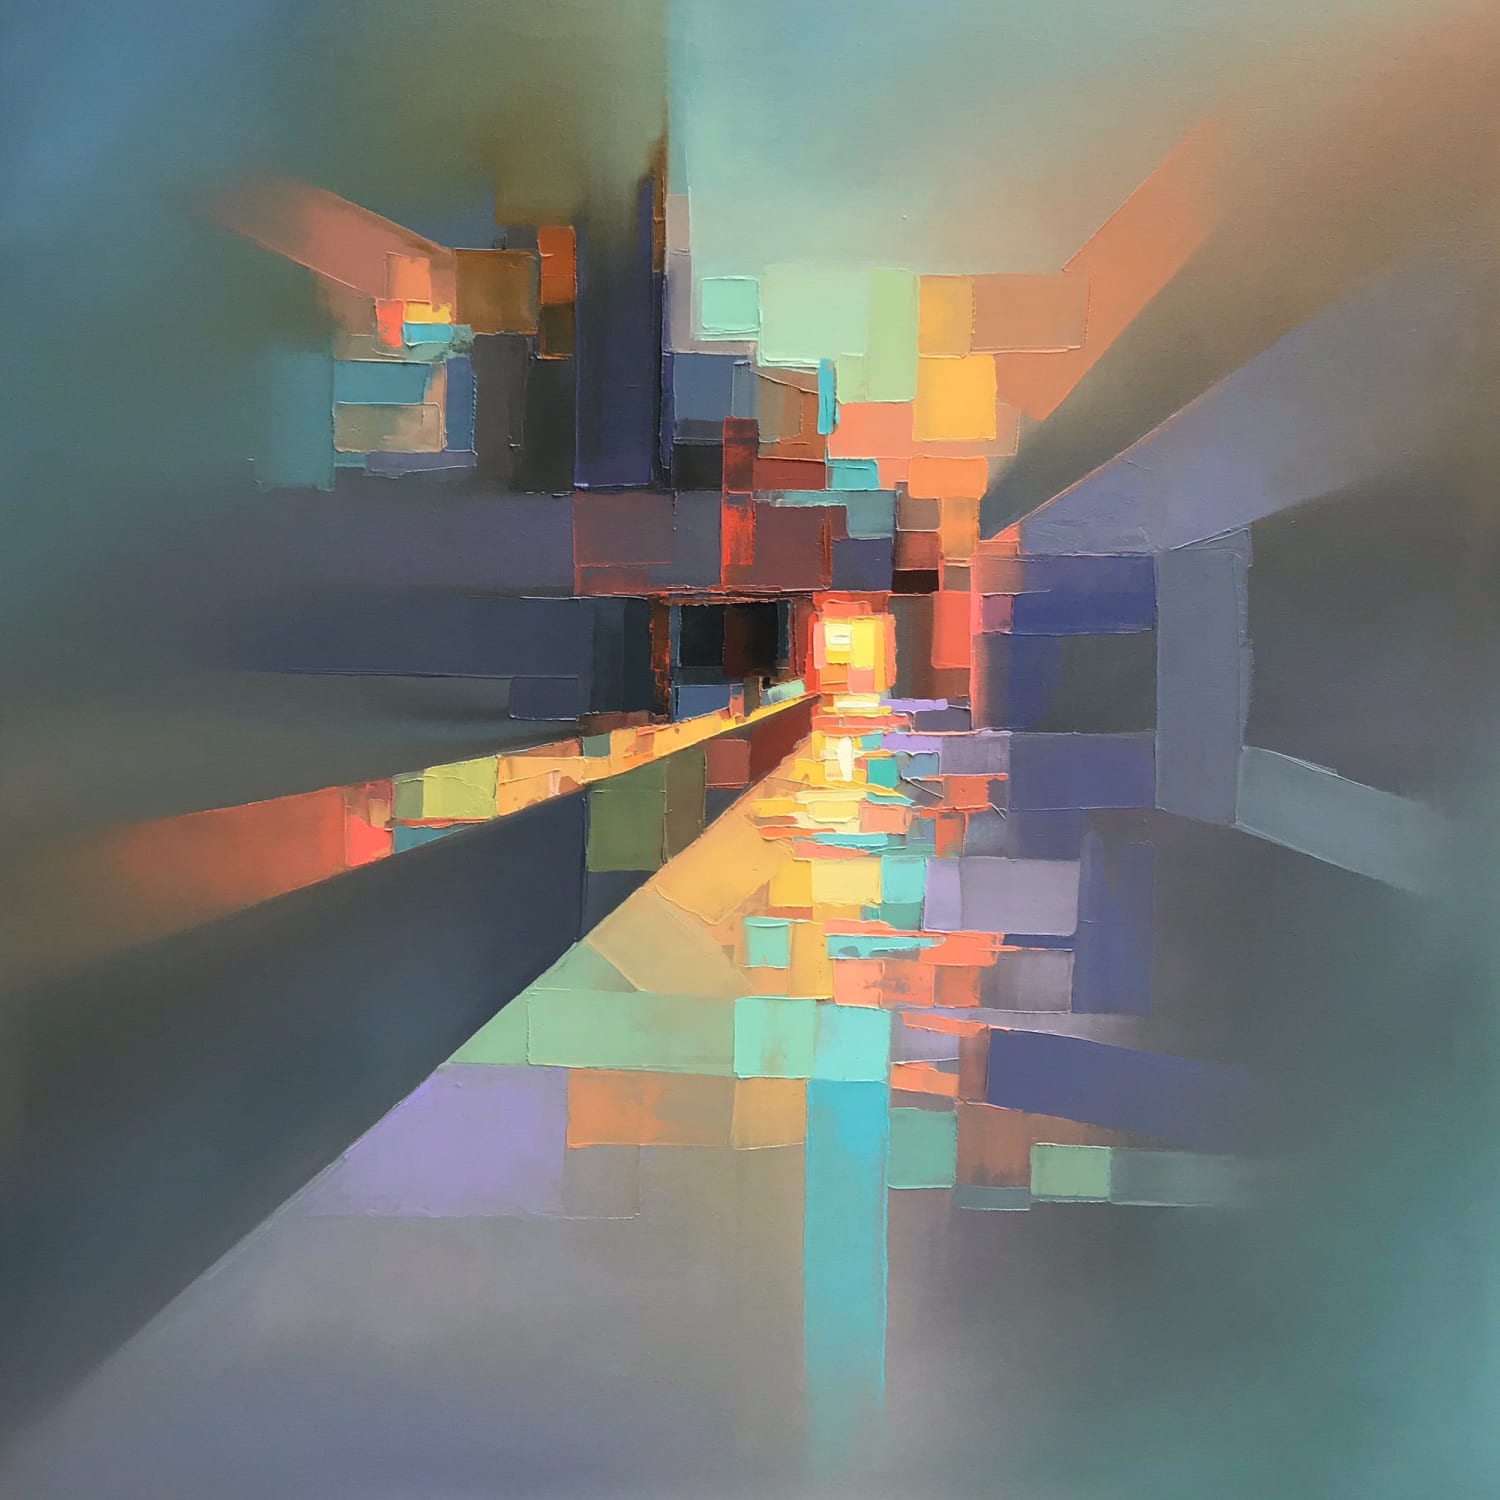 Landscapes by Jason Anderson Blend Precise Pixelation and Hazy Abstraction — Colossal